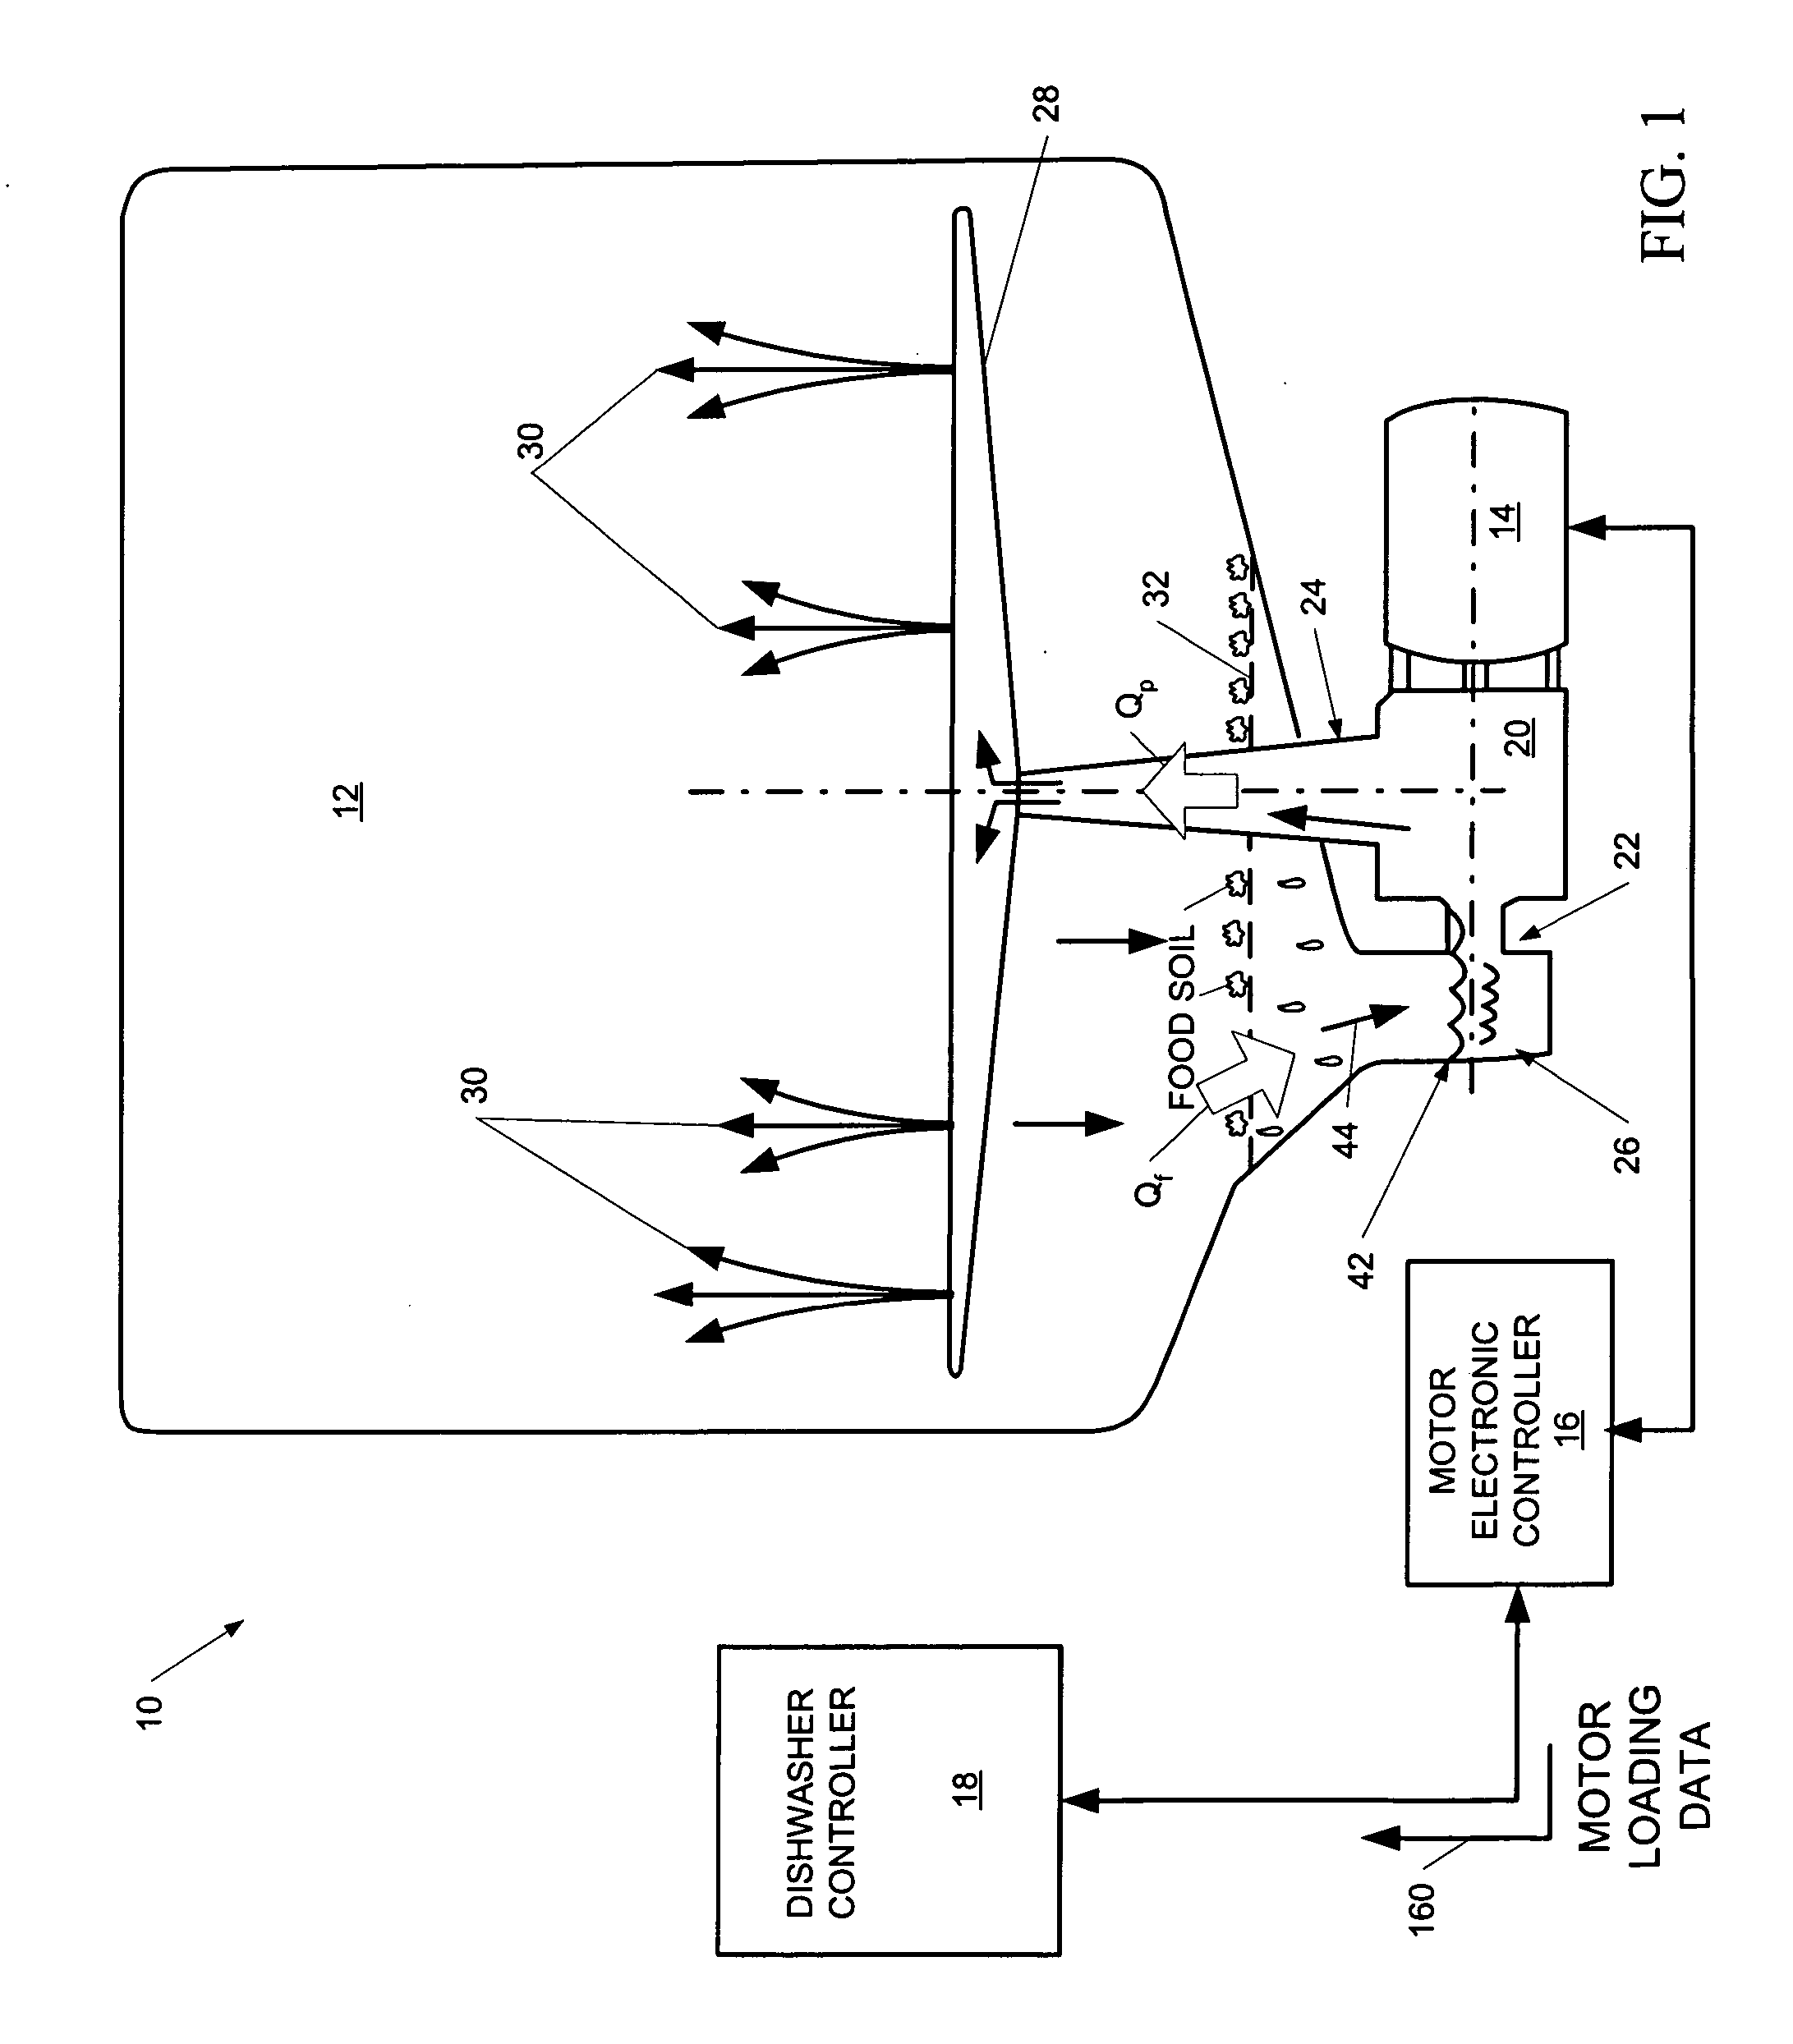 Computer-controlled system for dishwashers